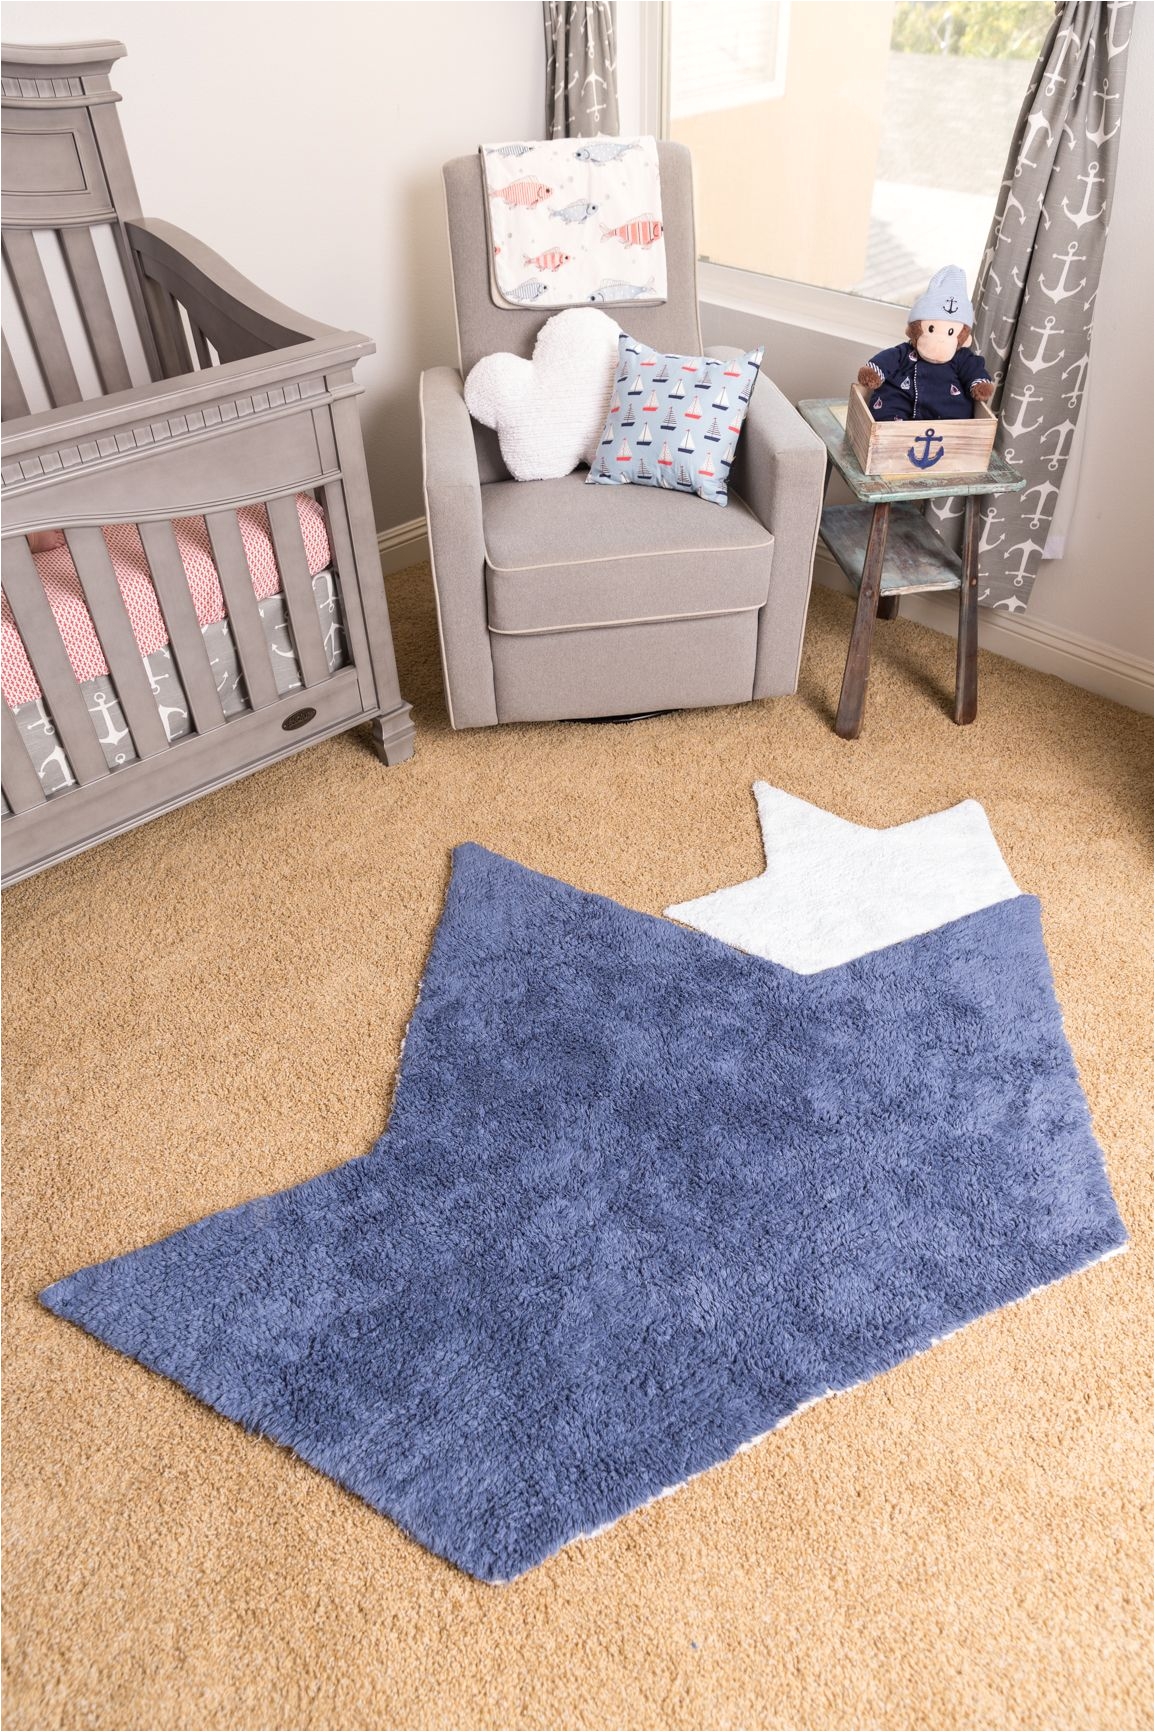 gray white and blue nautical nursery the boat shaped rug is the perfect touch